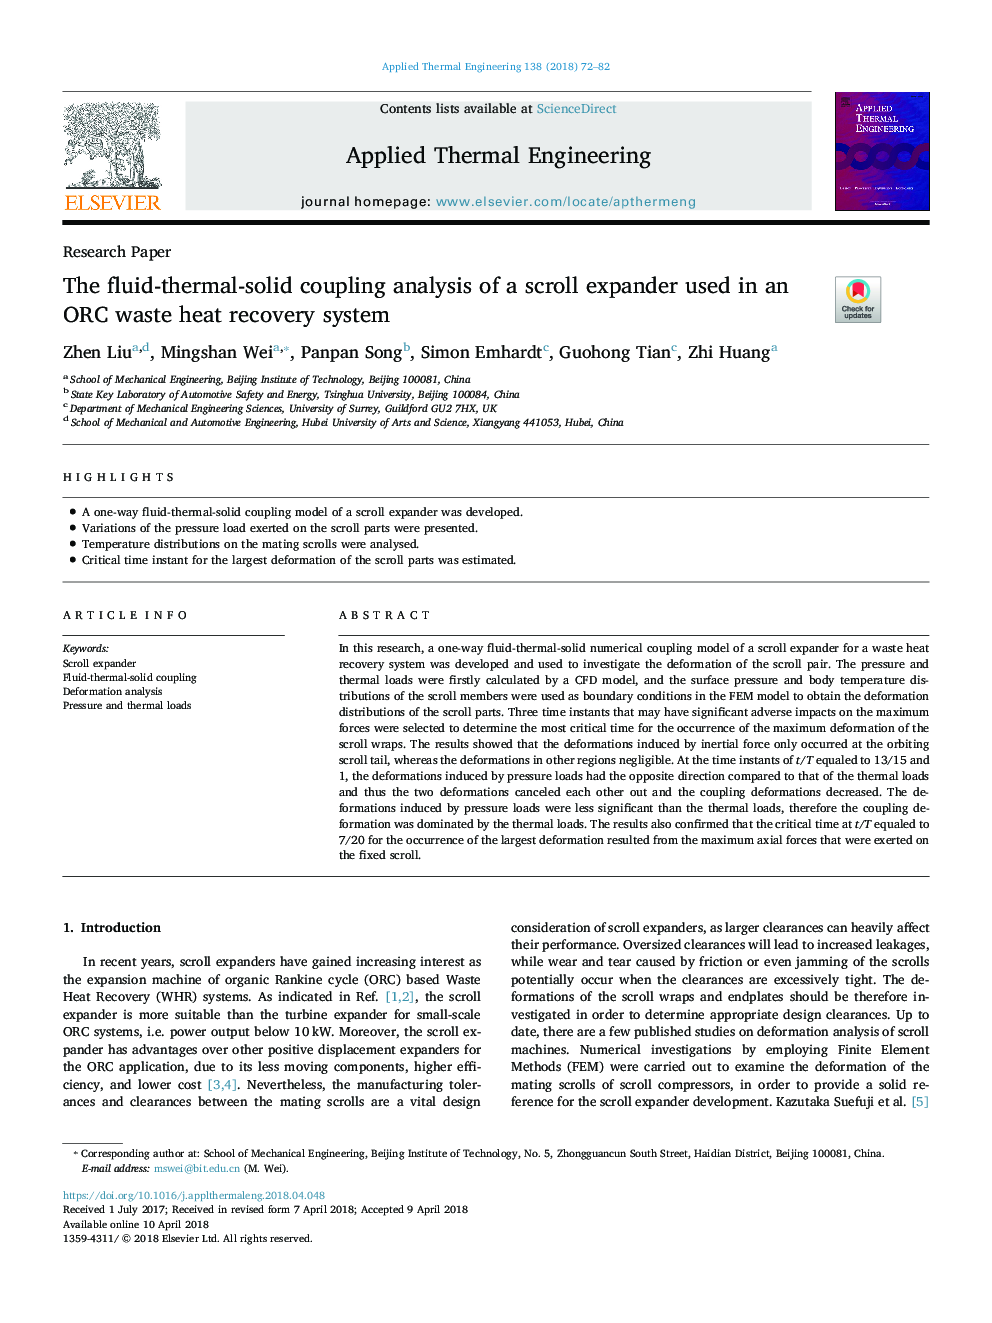 The fluid-thermal-solid coupling analysis of a scroll expander used in an ORC waste heat recovery system